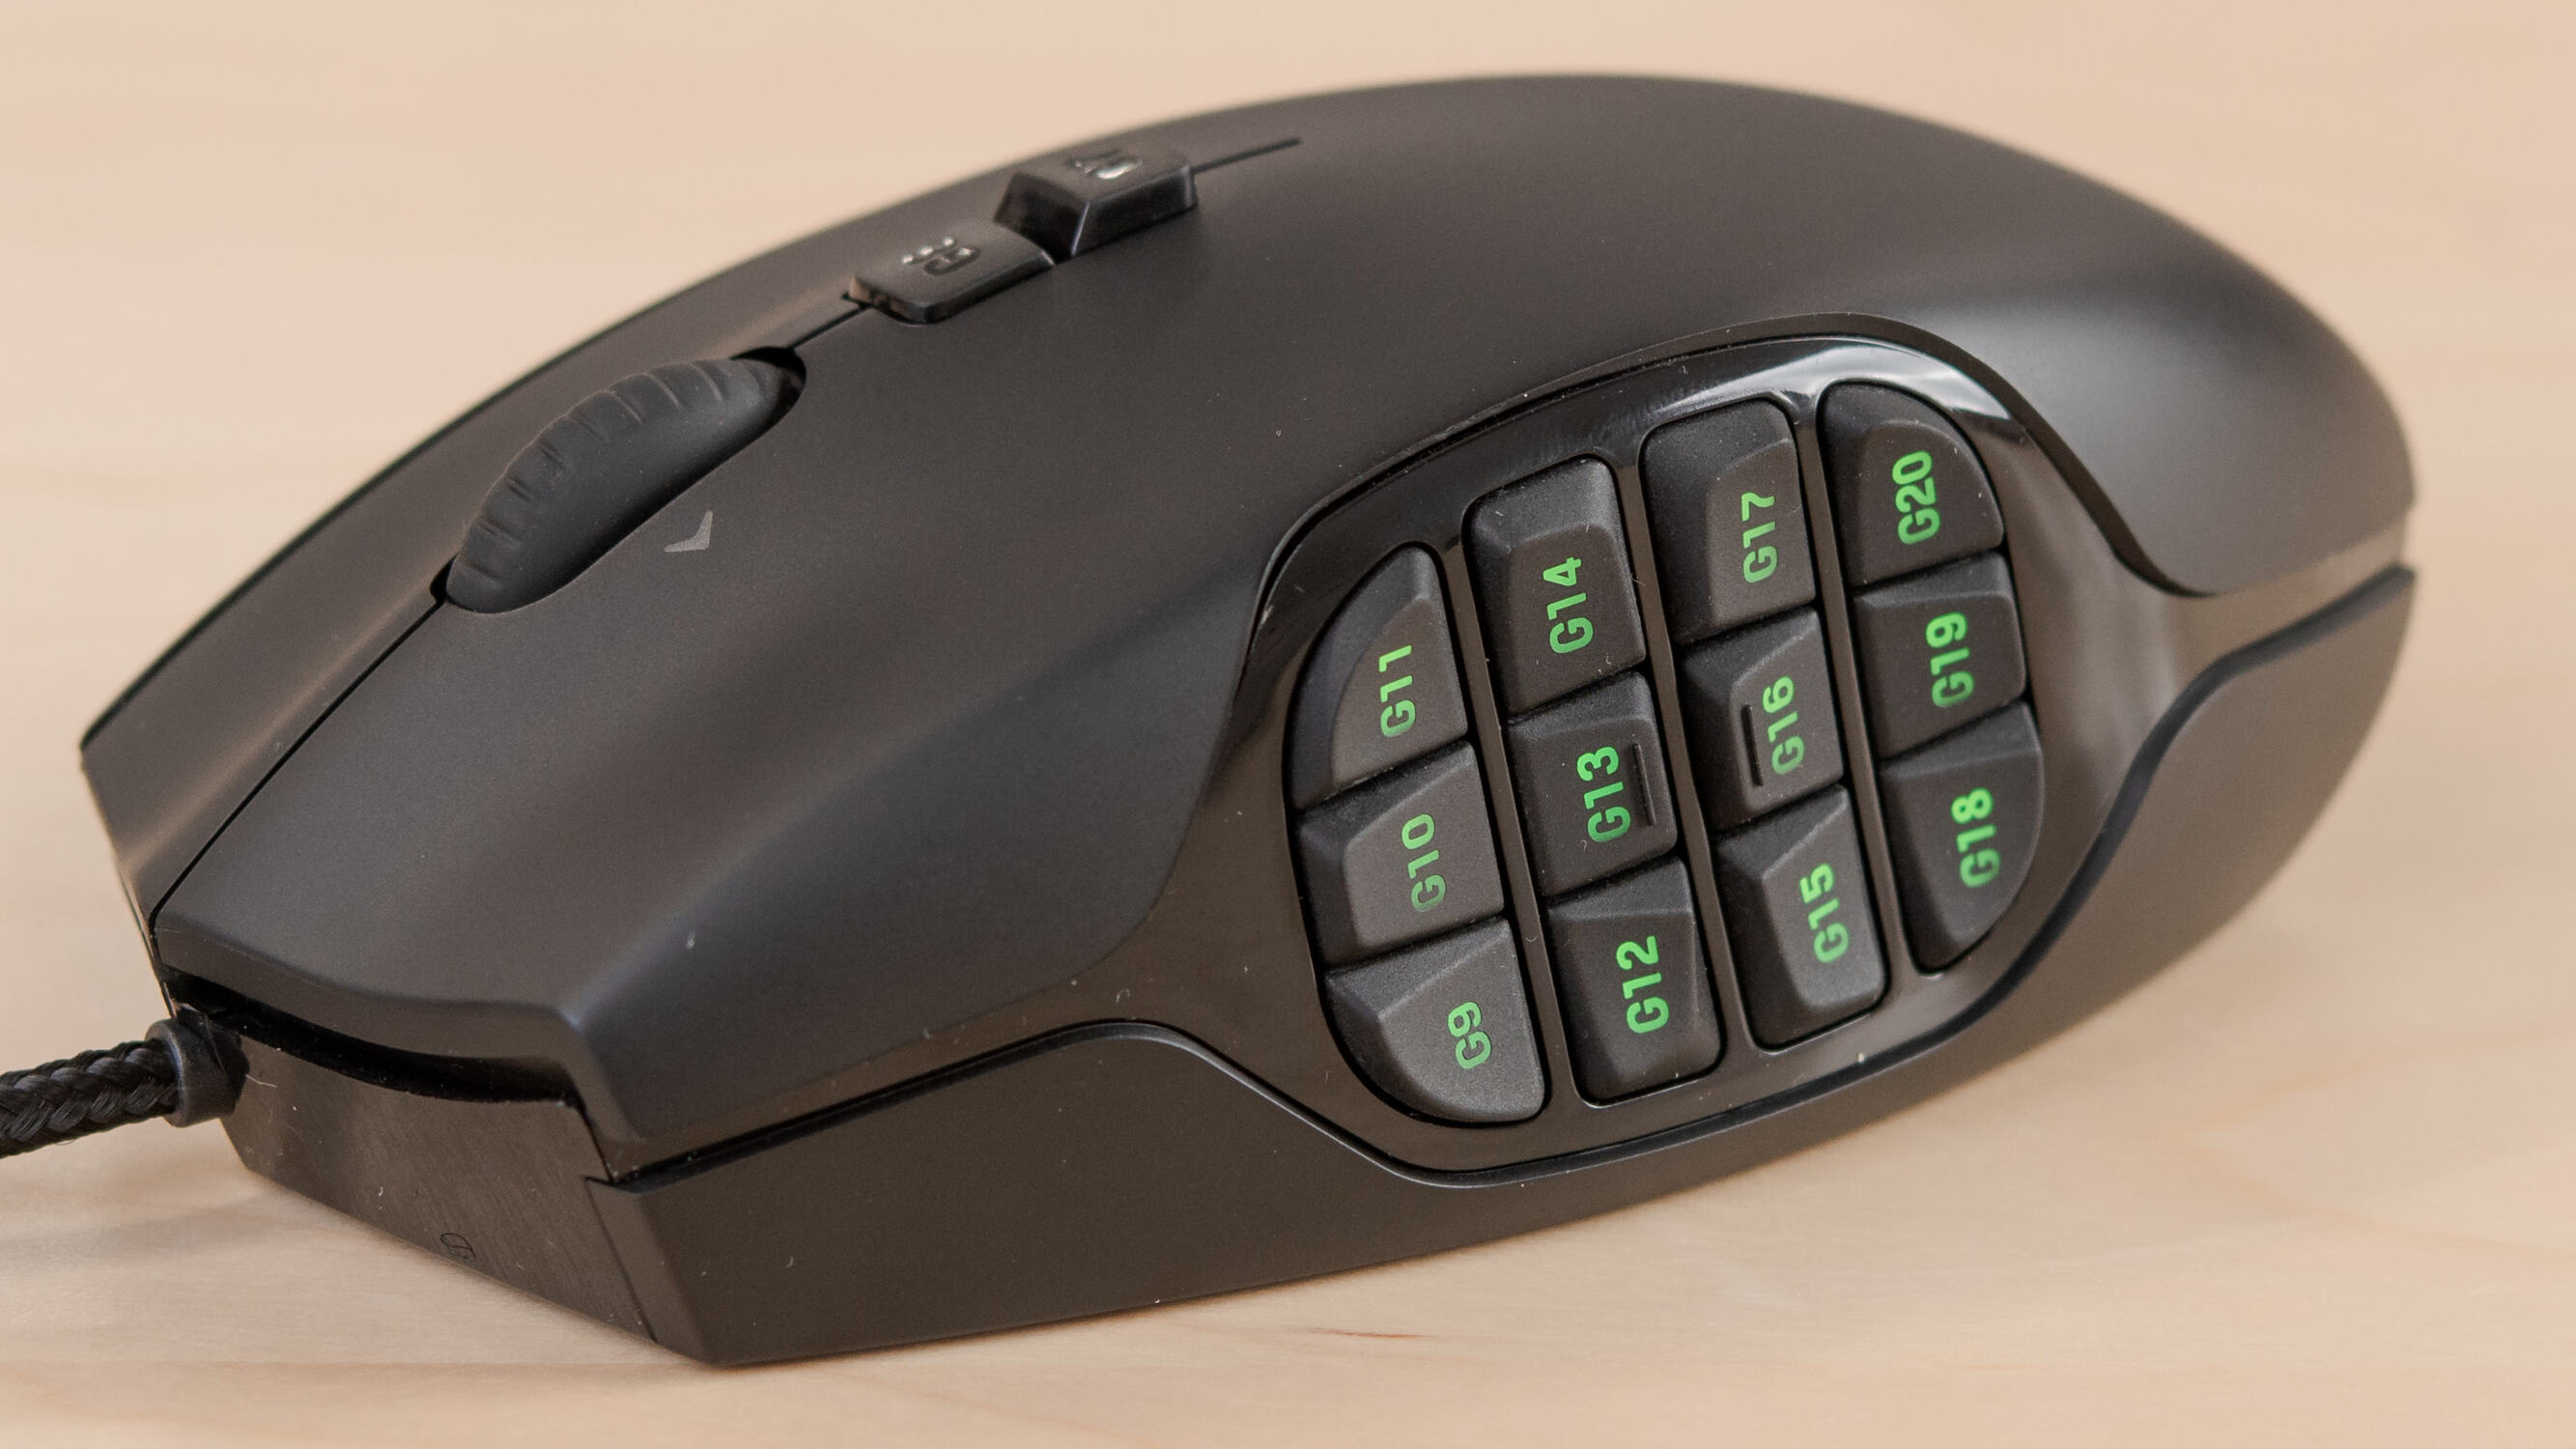 Logitech G600 MMO Gaming Mouse: How To Change DPI